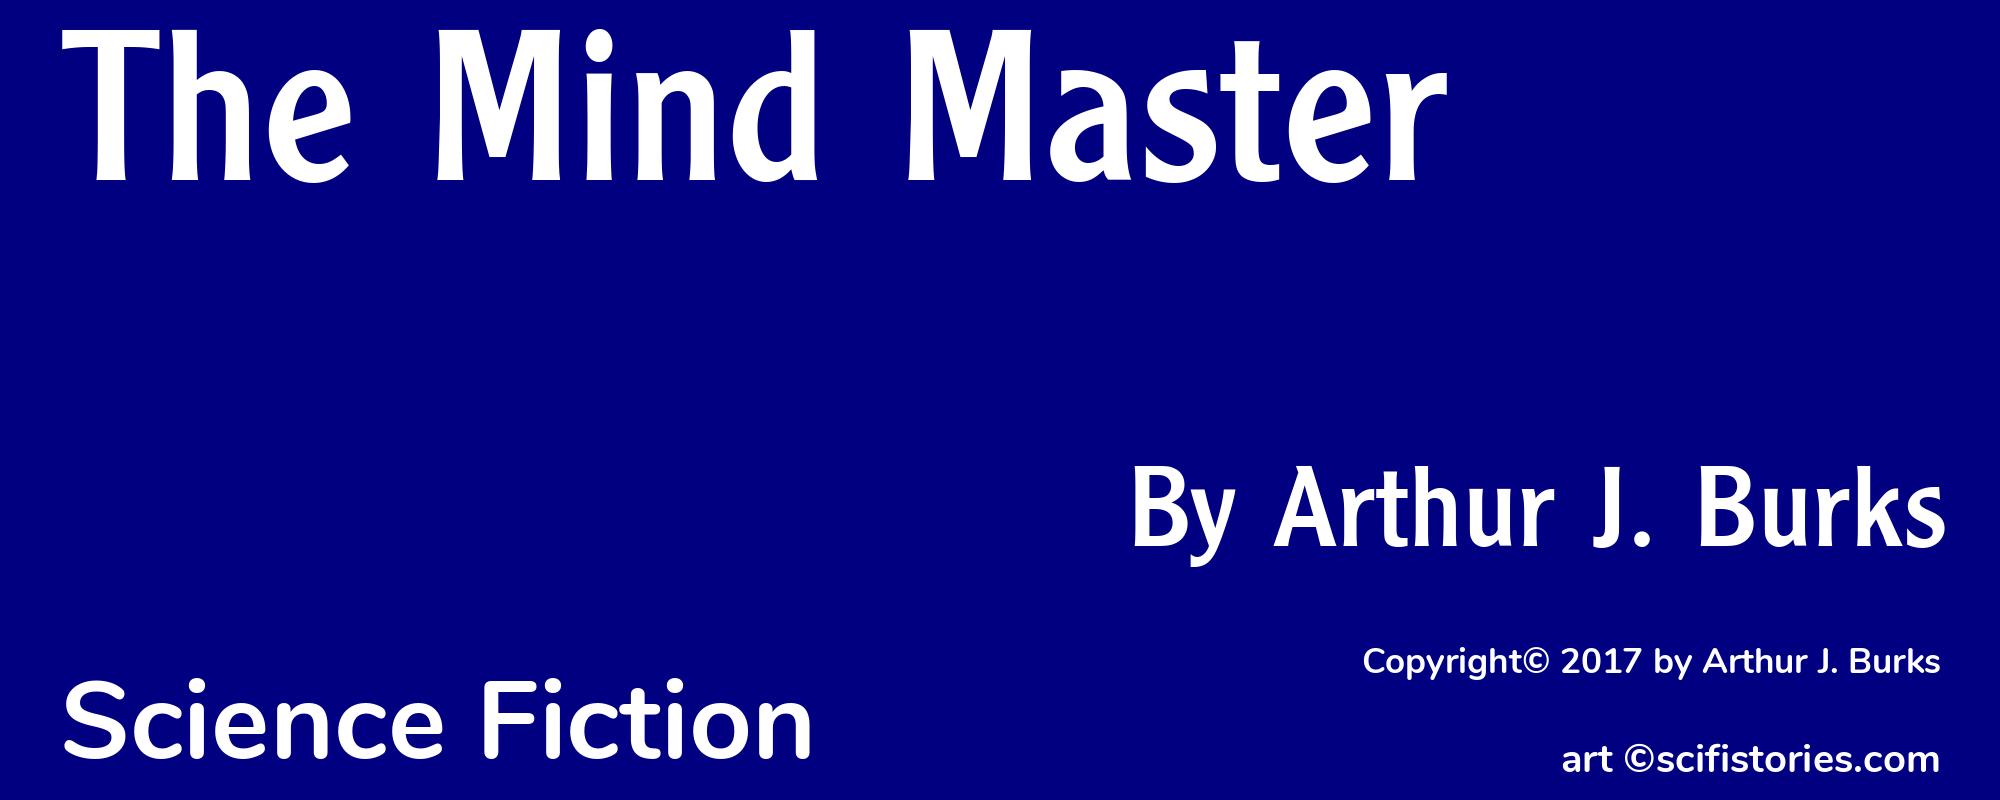 The Mind Master - Cover